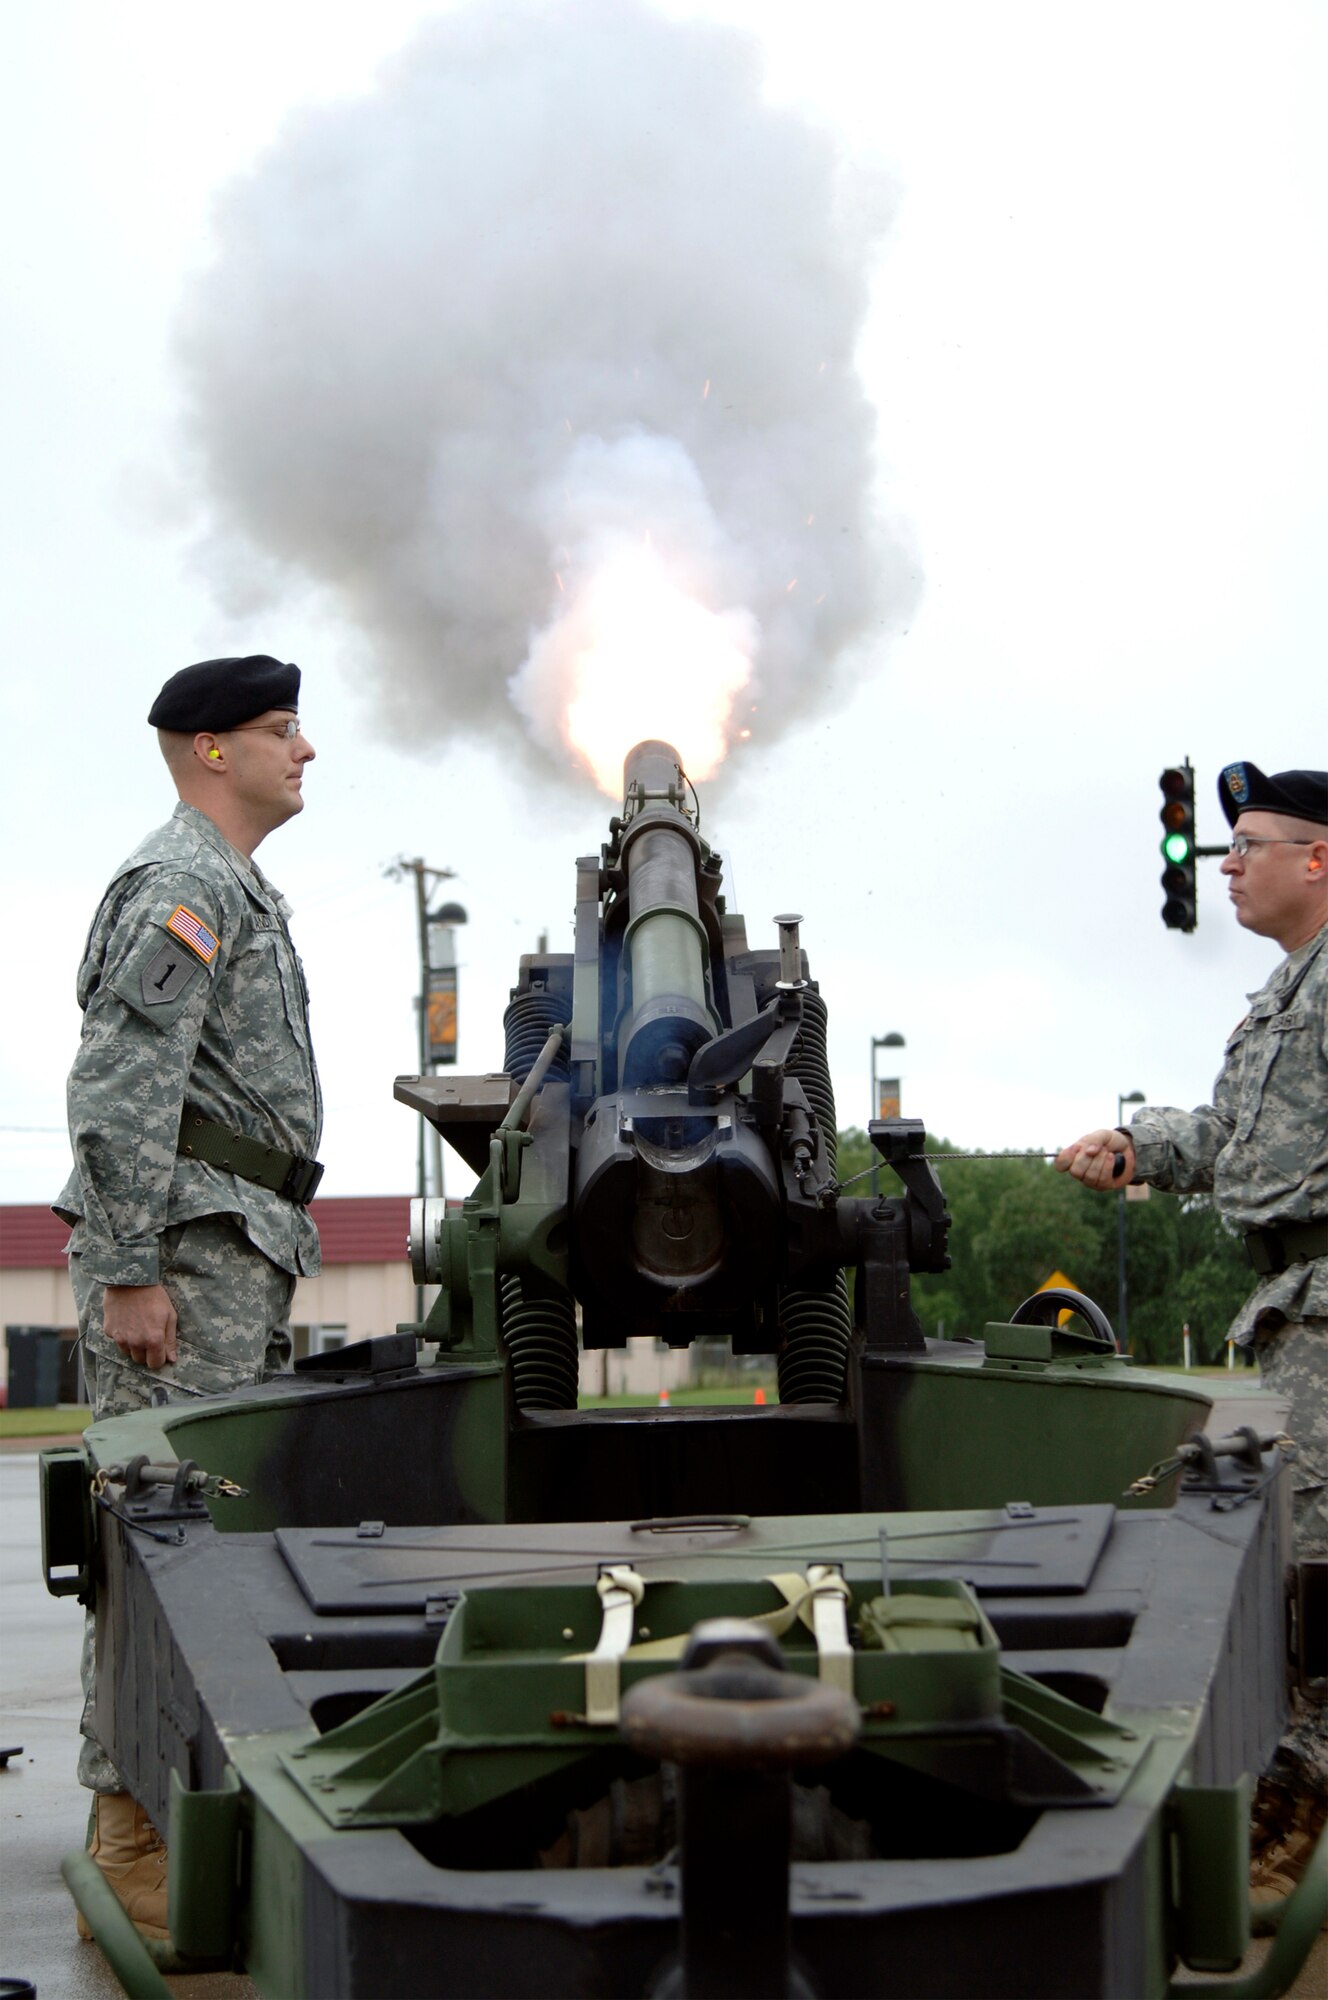 MCCONNELL AIR FORCE BASE, Kan. -- Army Sgt. 1st Class Bryant Handy and Army Staff Sgt. Brian Cotton, 89th Regional Readiness Command, fire a 105 mm howitzer downtown Wichita at the first Wichita “America Supports You” Freedom Walk, Sept. 13.  The howitzer fire signified the start of the two-mile walk. (Photo by Staff Sgt. Ronald Lafosse)